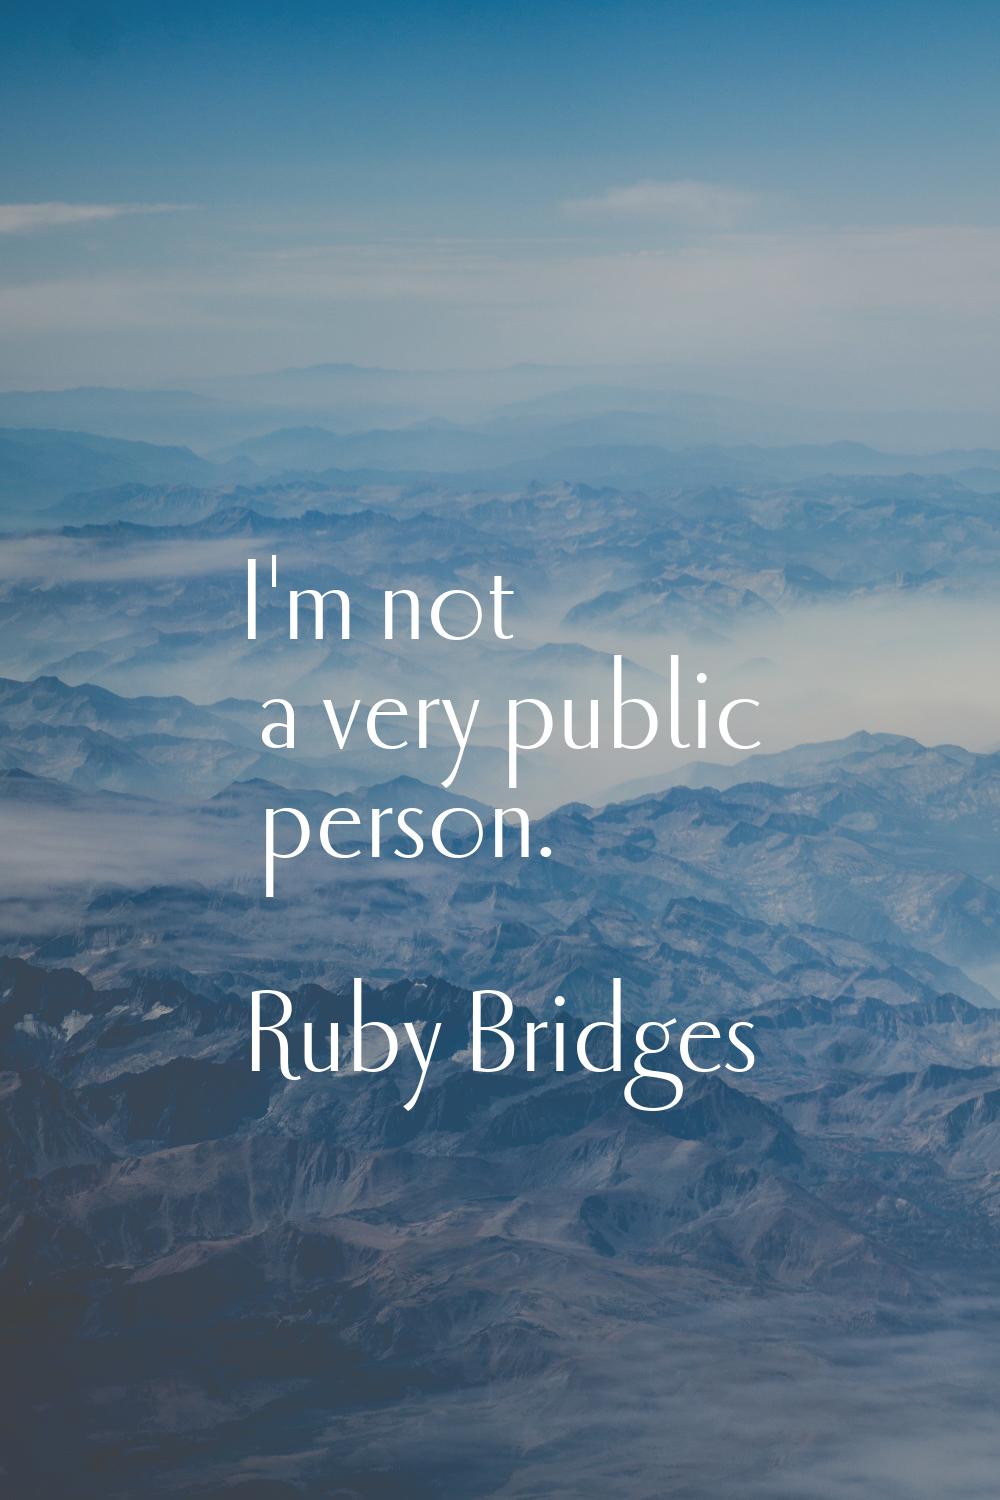 I'm not a very public person.